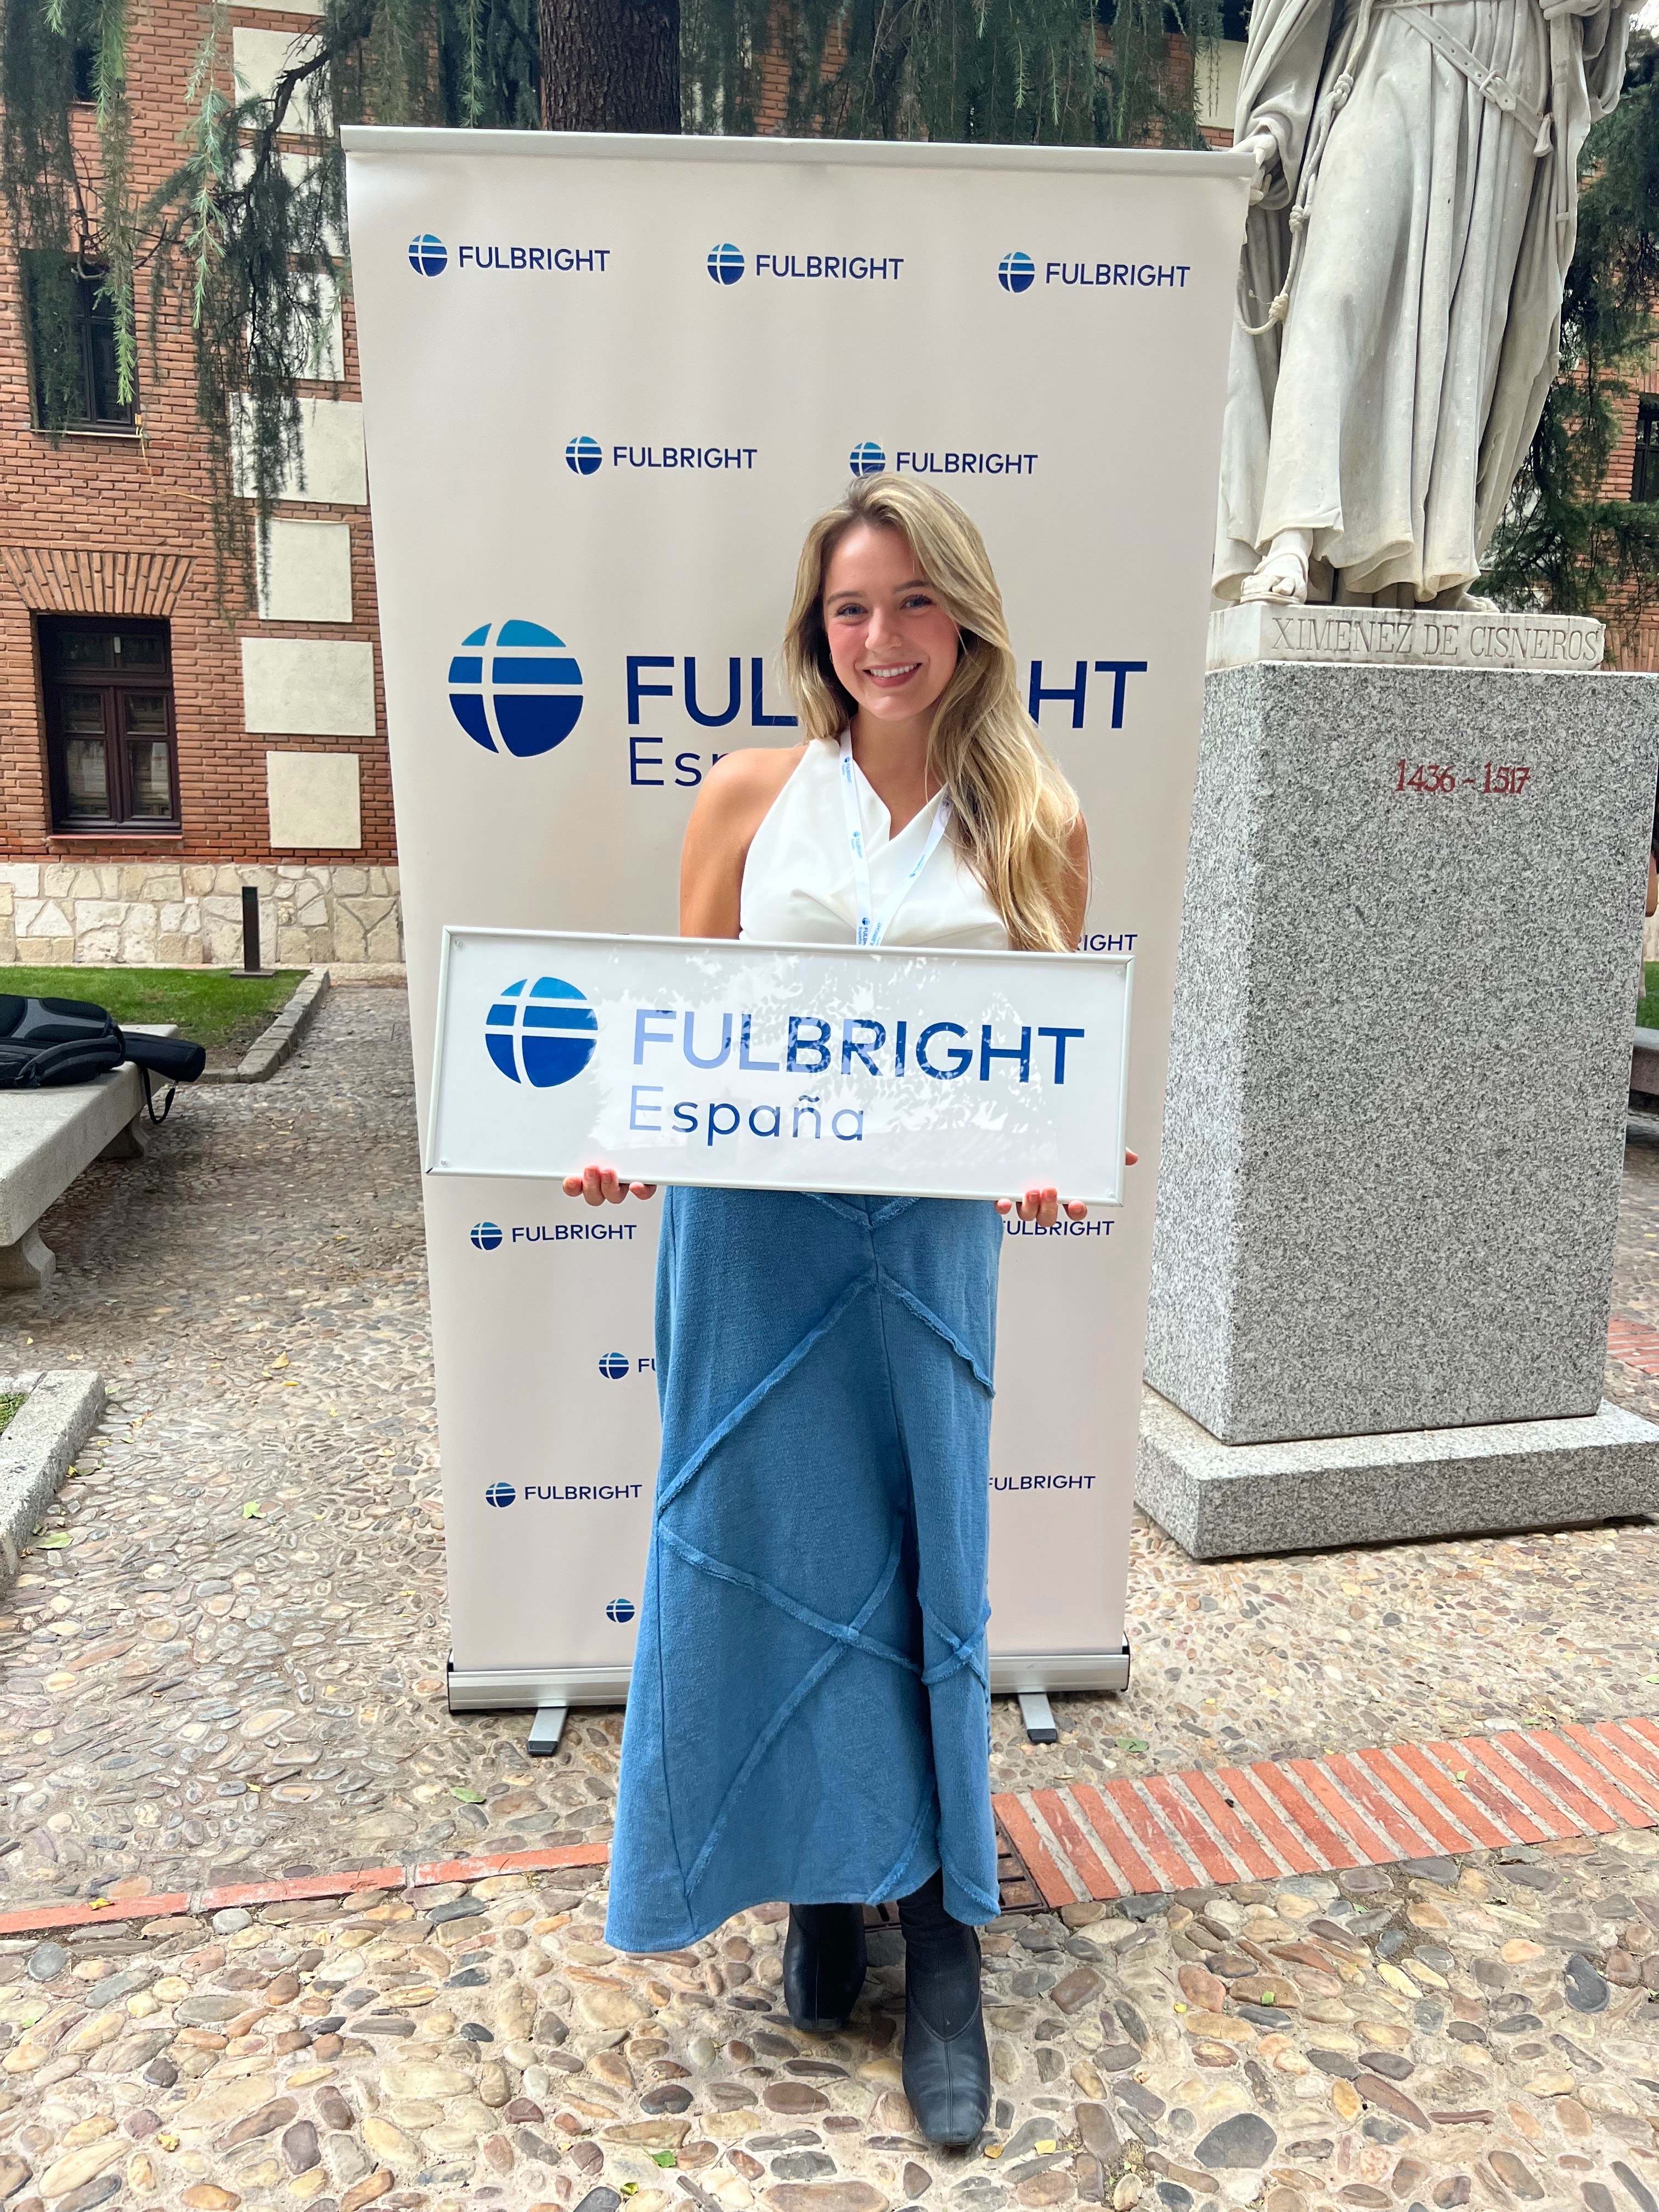 11th Annual Intensive Fulbright Program Workshop promotional image